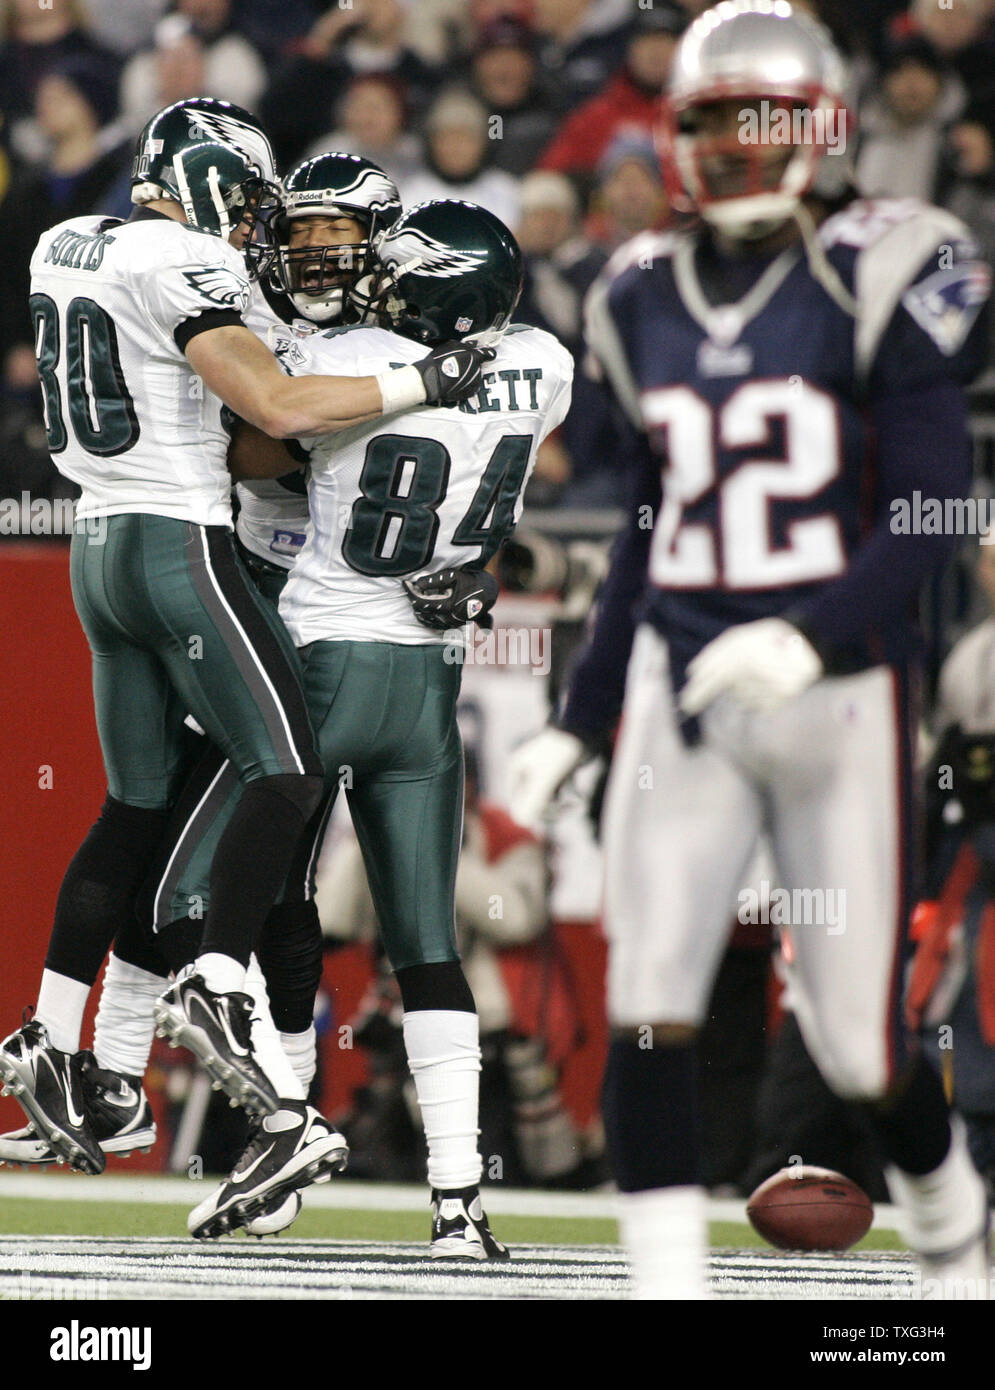 Members of the Philadelphia Eagles Kevin Curtis (80) and Hank Baskett (84) give a hug to teammate Greg Lewis (C) after Lewis scored in the second quarter against the New England Patriots at Gillette Stadium in Foxboro, Massachusetts on November 25, 2007. Walking off the field is Patriots cornerback Asante Samel (22). (UPI Photo/Matthew Healey) Stock Photo